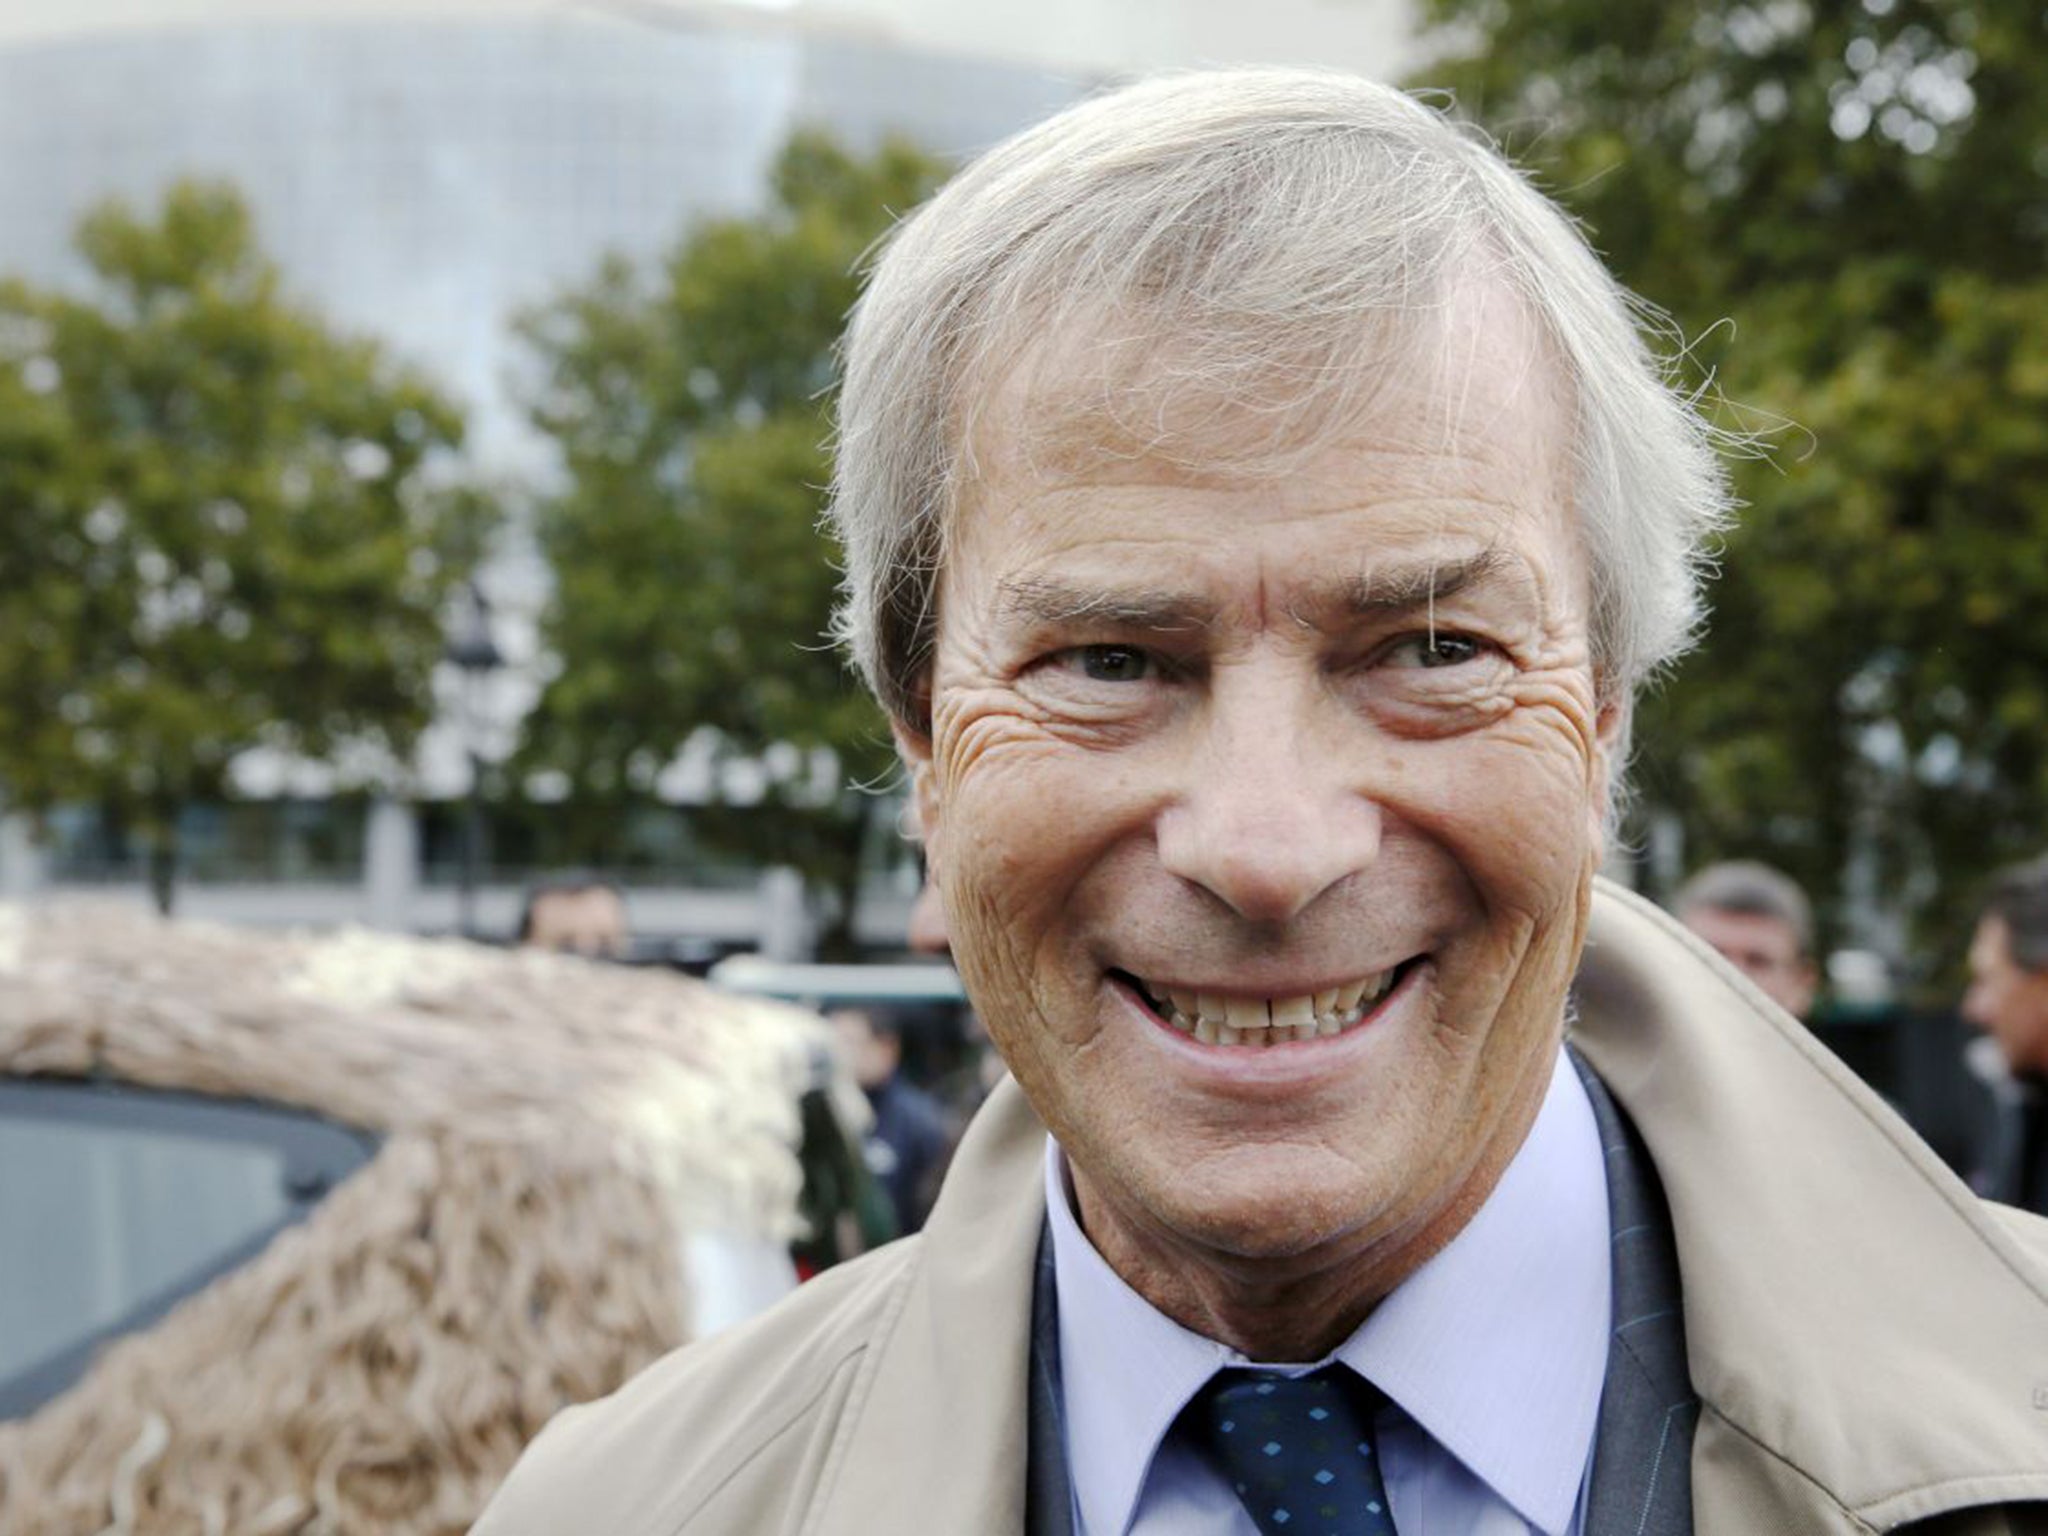 Vincent Bolloré, head of industrial group Bolloré, has sacked many since taking control of Vivendi